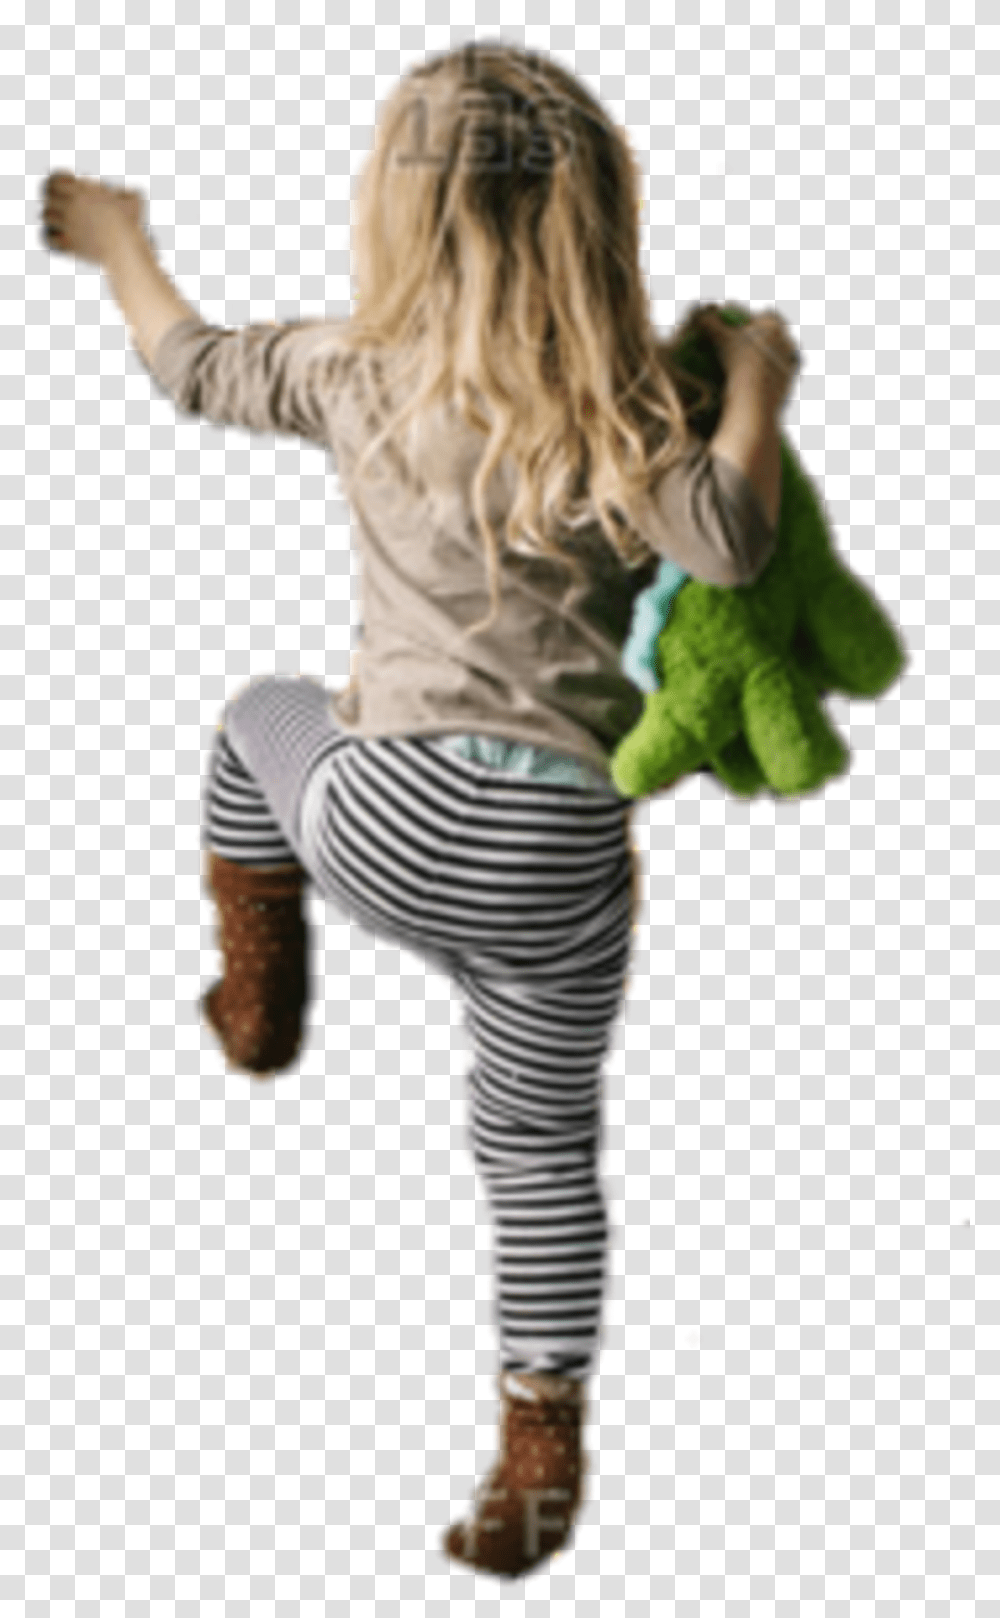 Kid Girl Climbing Child Girl Climbing On Tree, Performer, Person, Costume Transparent Png